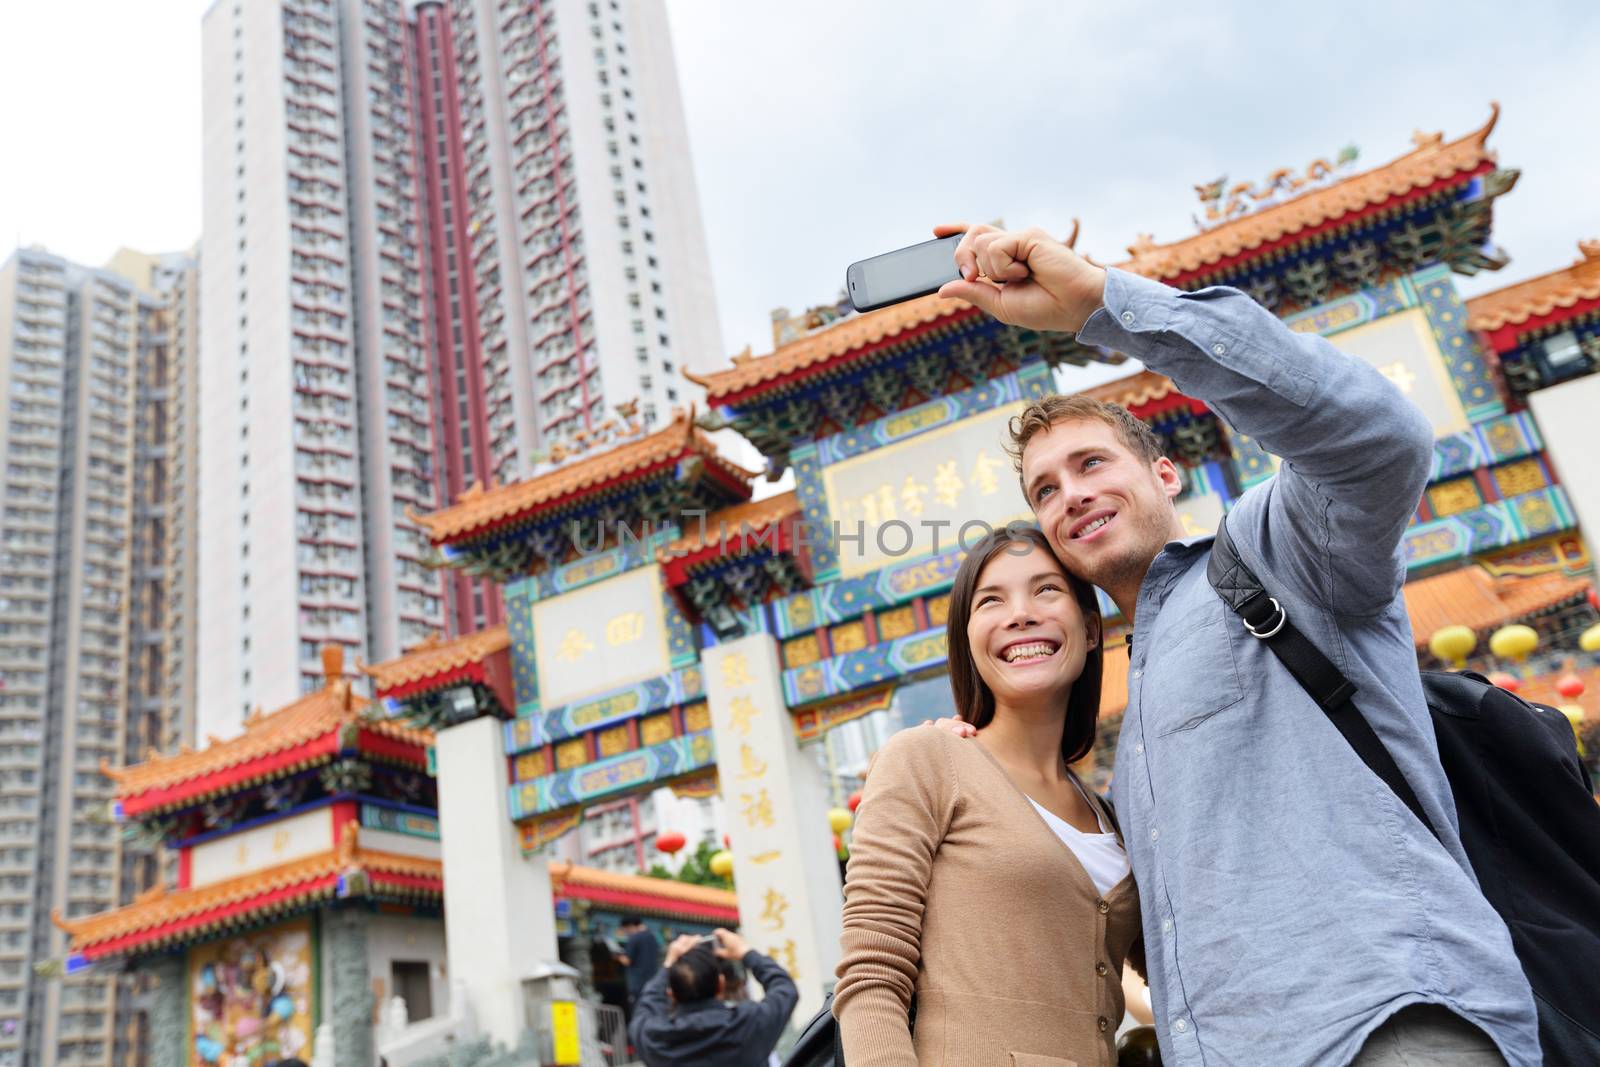 Hong Kong tourist attraction Wong Tai Sin Temple. Tourists taking selfie photo pictures by famous Hong Kong landmark. Romantic couple visiting and sightseeing Taoist temple. Asian woman, Caucasian man